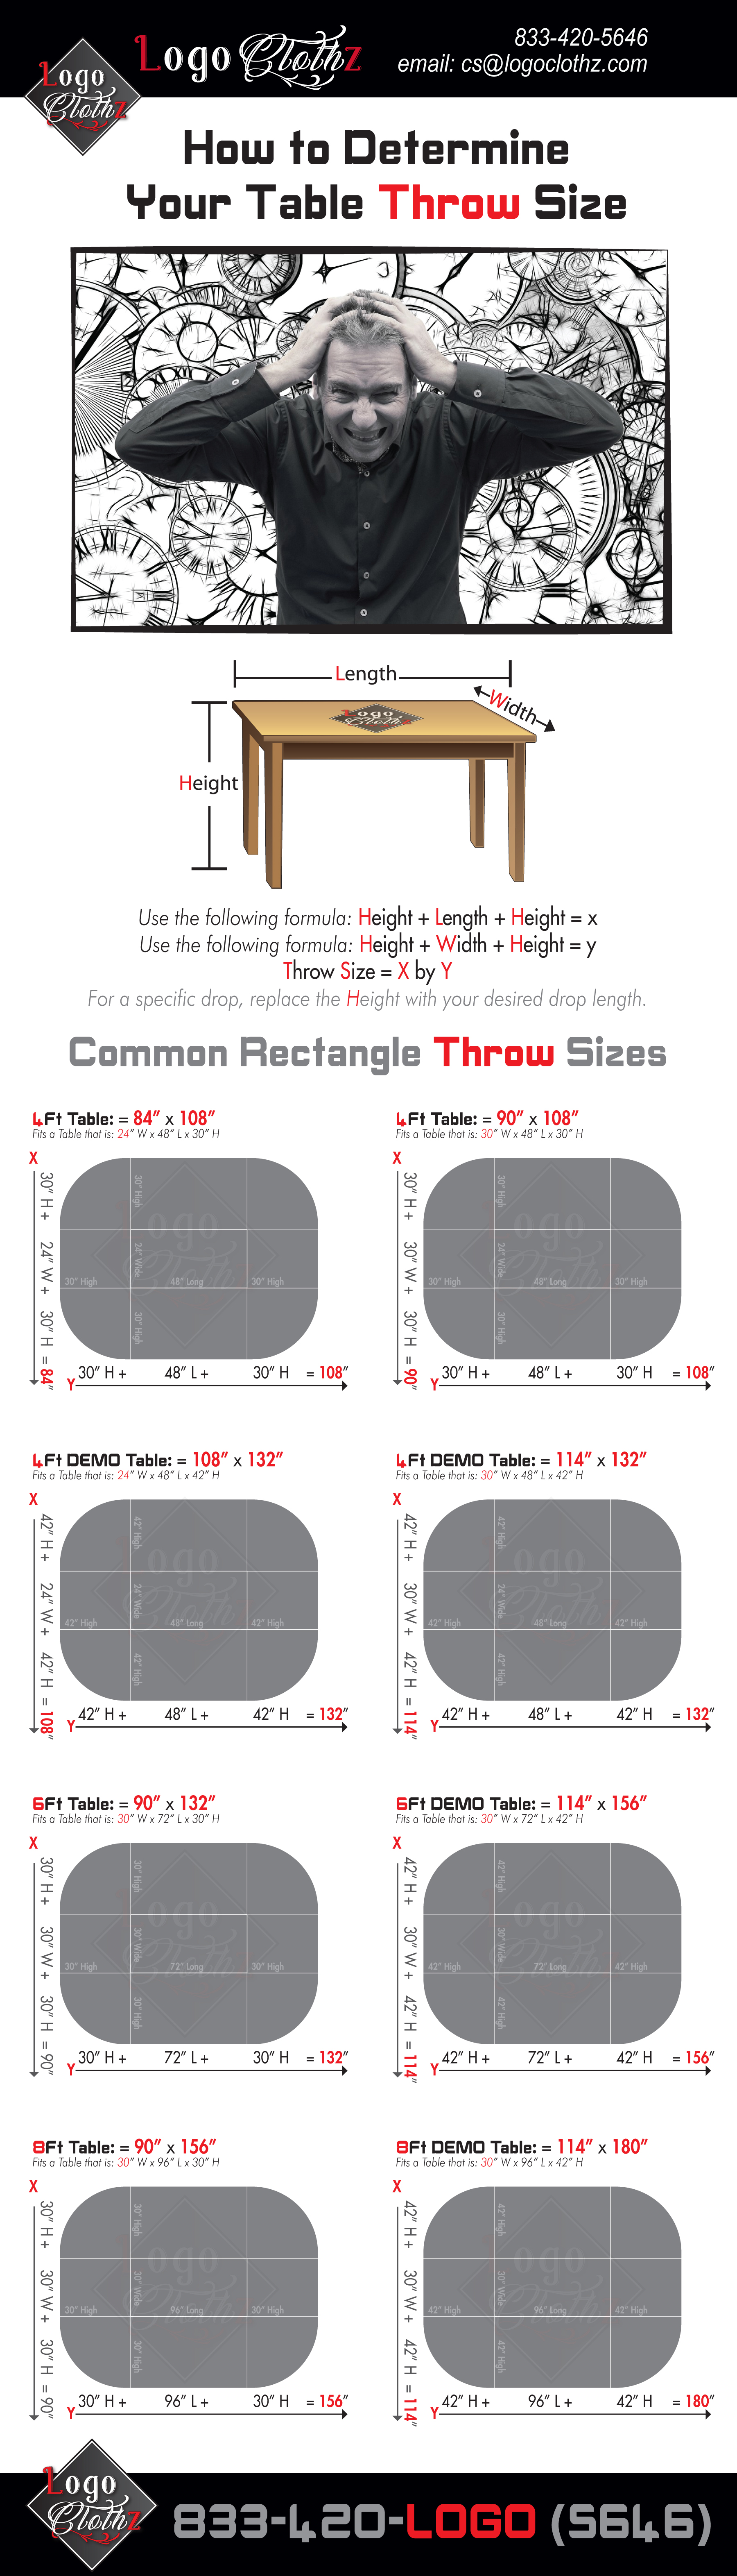 size-guide-rectangle-table-throws-determine-your-size.jpg